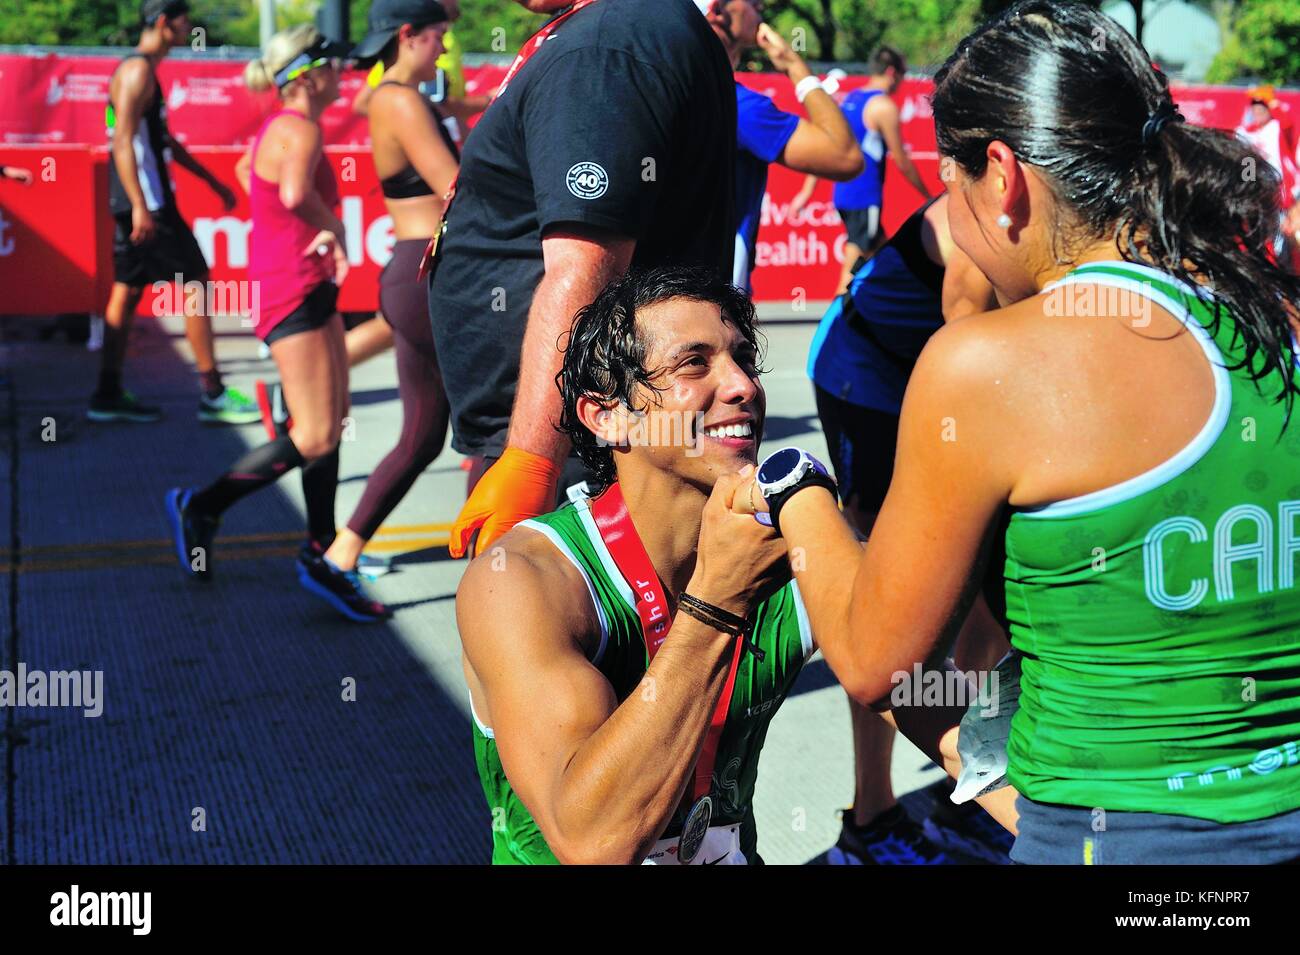 Just after crossing the finish line at the 2017 Chicago Marathon, a runner got down to one knee and proposed to a fellow competitor. Stock Photo